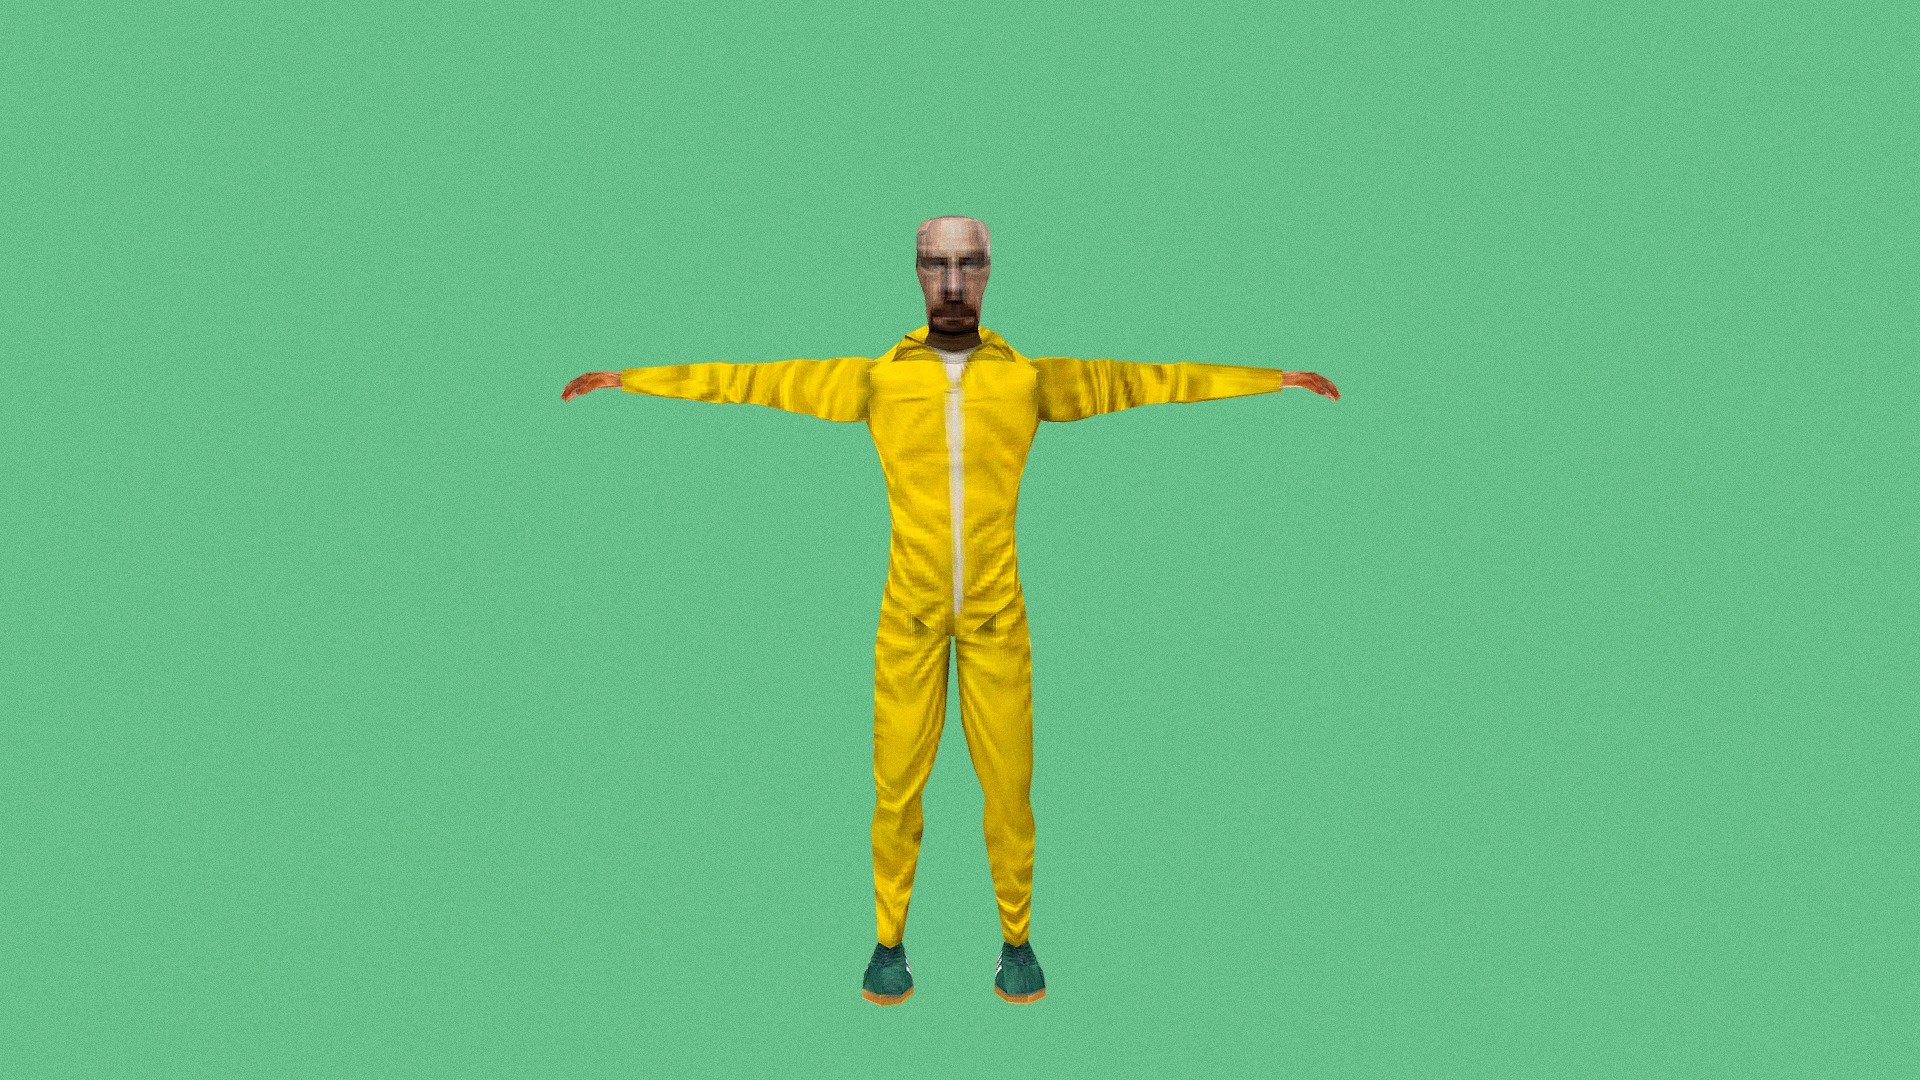 PS1 style Walter White wearing his recognizable yellow hazmat costume and Adidas Gazelle Trainers Green/White/Gum
Model was made in Blender
Texture was prepared in Krita
880 faces - PS1 style Walter White - Download Free 3D model by MaxTheWizzard (@thuglifer) 3d model